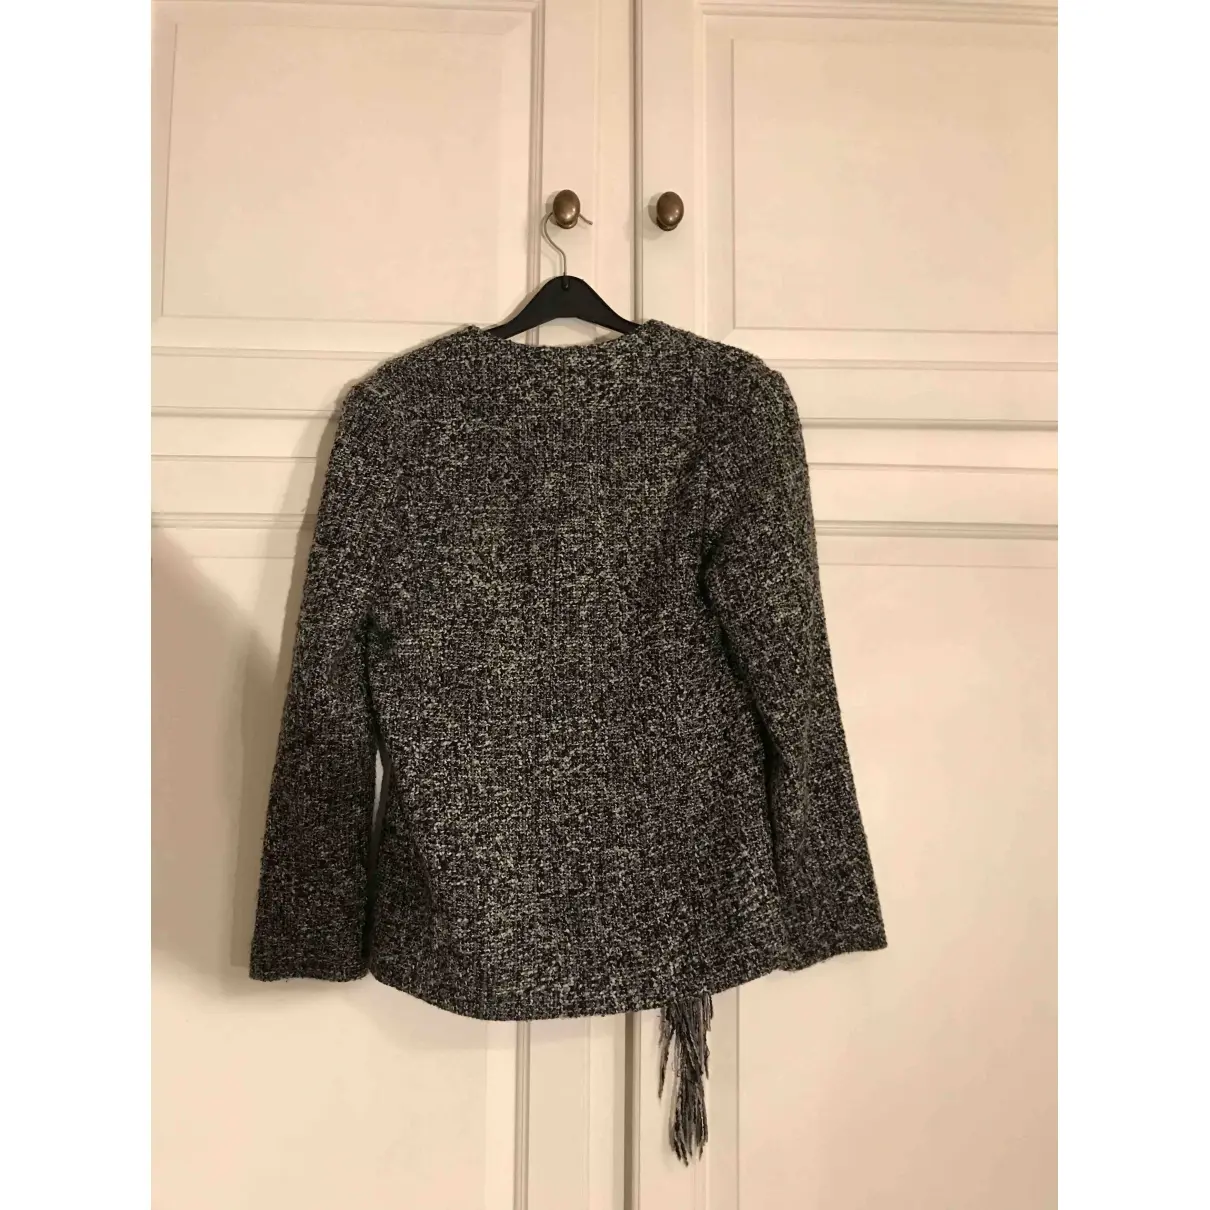 Ann-Sofie Back Grey Synthetic Jacket for sale